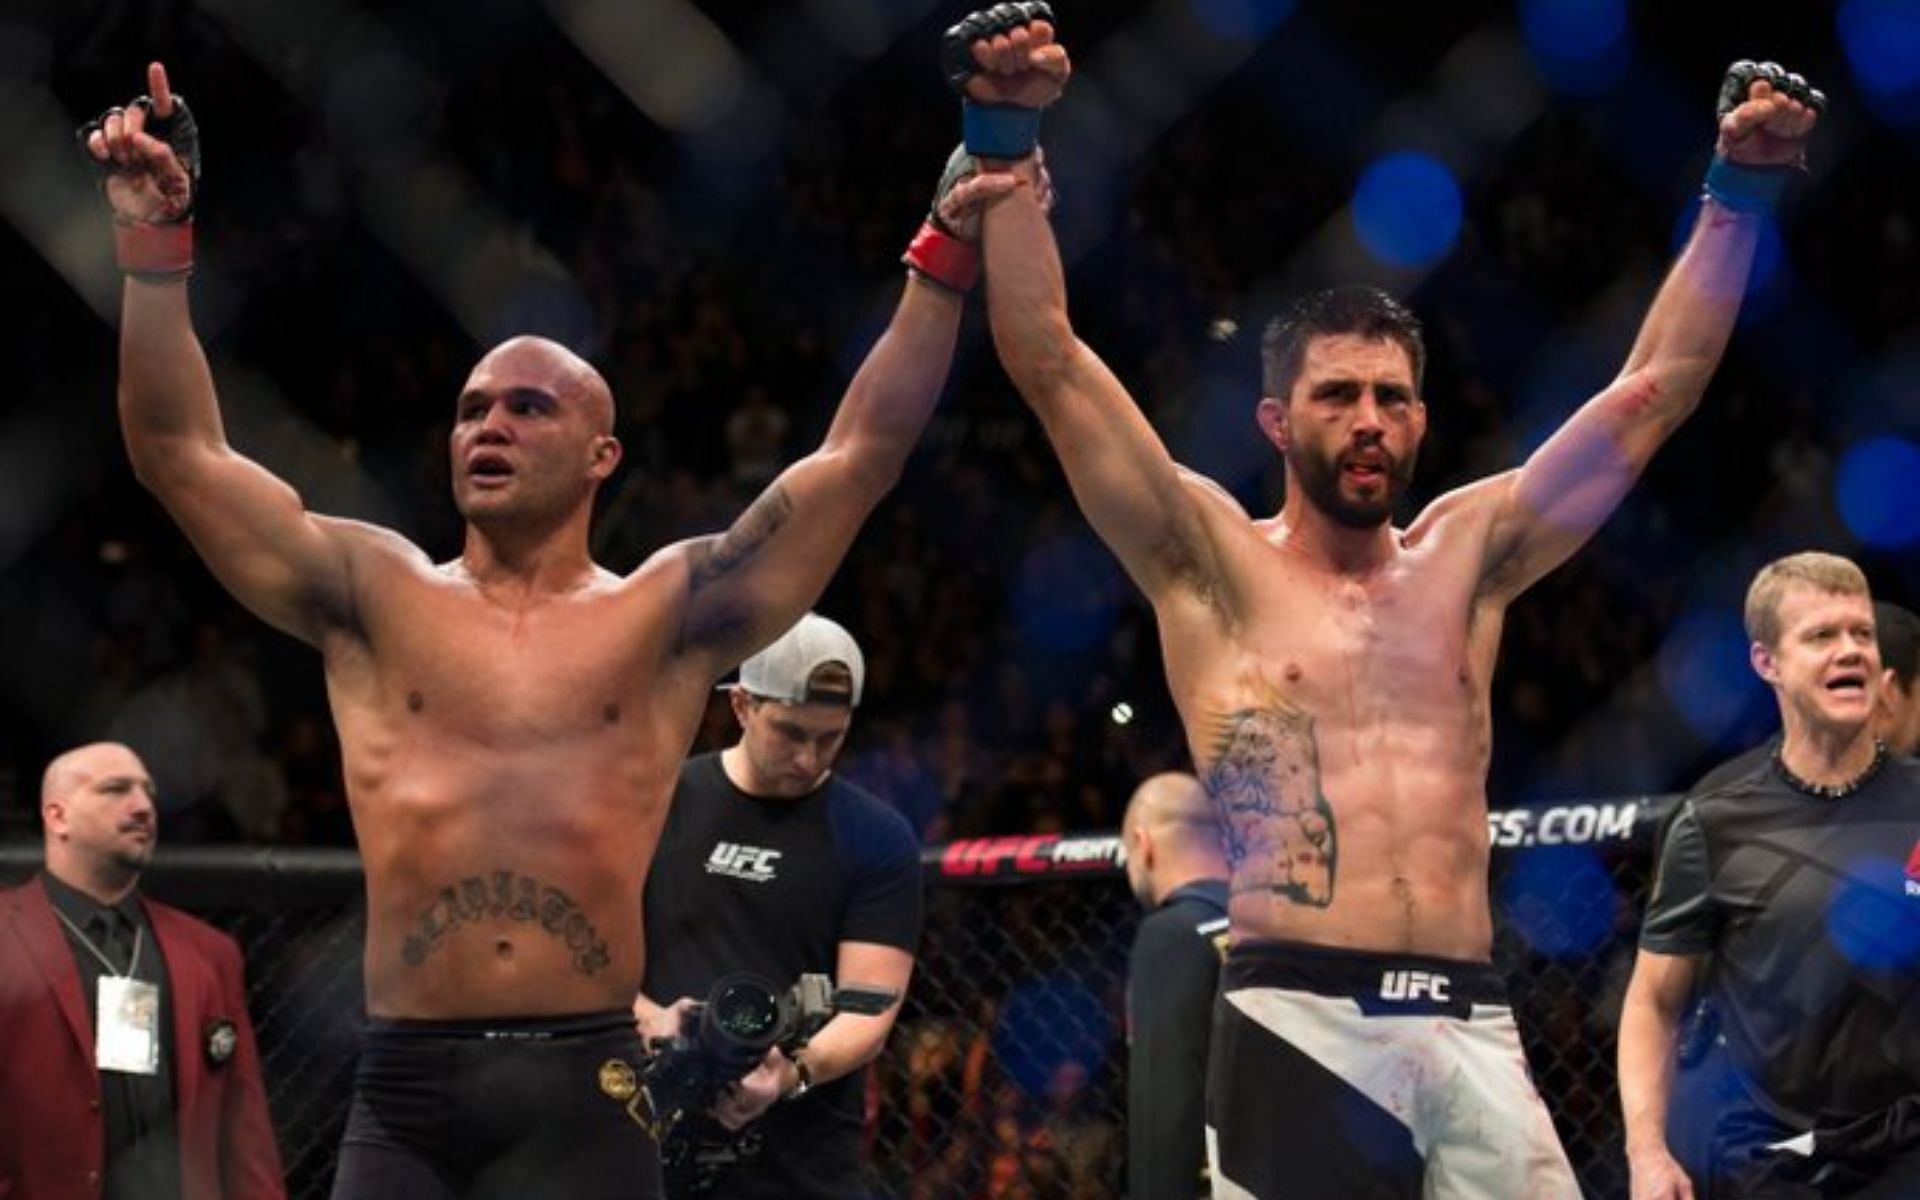 Robbie Lawler (Left), and Carlos Condit (Right) {Photo credit: @ufc - Twitter}